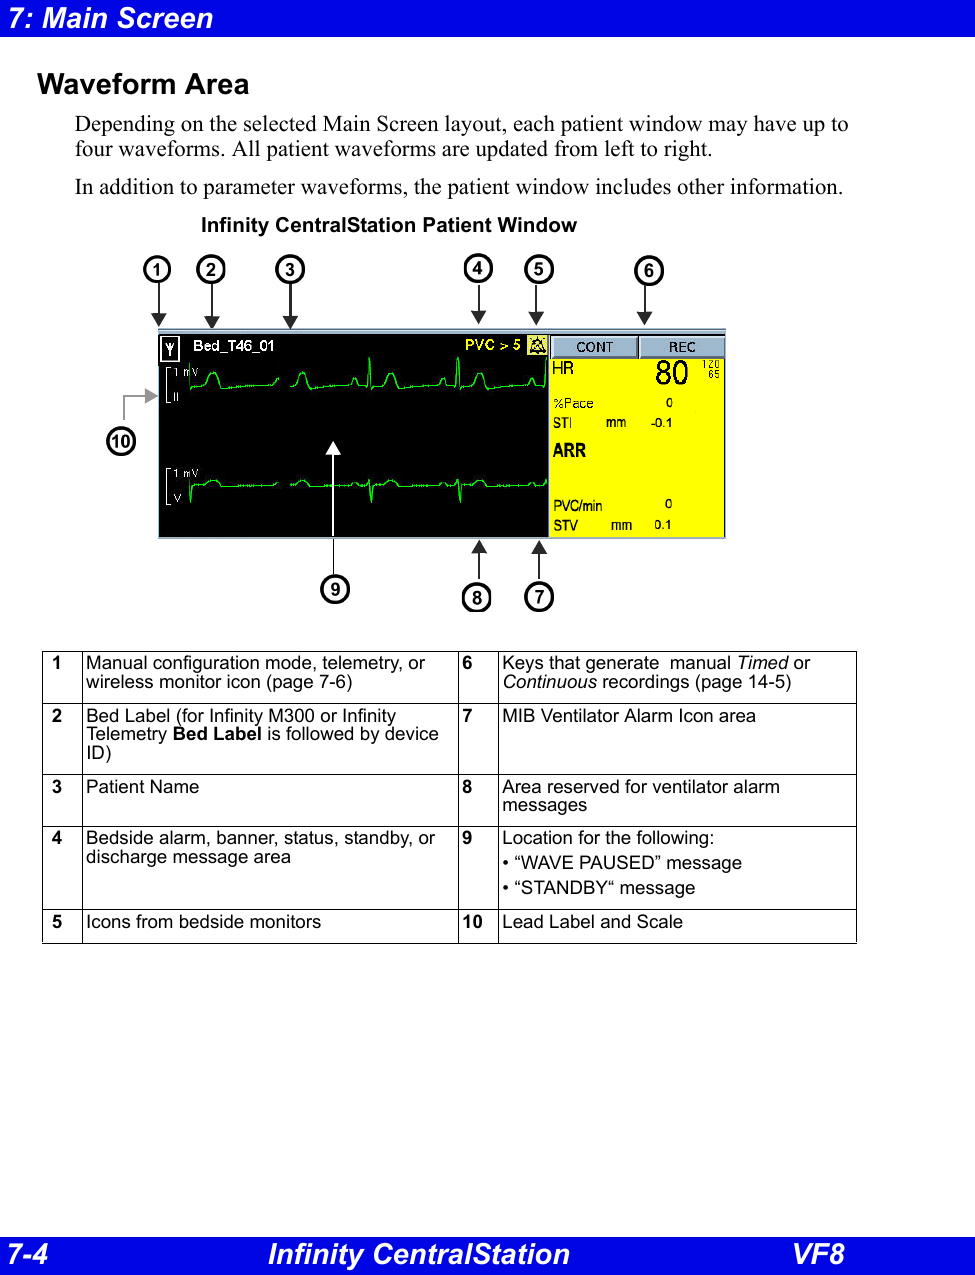 7-4 Infinity CentralStation VF87: Main ScreenWaveform AreaDepending on the selected Main Screen layout, each patient window may have up to four waveforms. All patient waveforms are updated from left to right. In addition to parameter waveforms, the patient window includes other information. Infinity CentralStation Patient Window  1 Manual configuration mode, telemetry, or wireless monitor icon (page 7-6)6Keys that generate  manual Timed or Continuous recordings (page 14-5) 2 Bed Label (for Infinity M300 or Infinity Tele metr y  Bed Label is followed by device ID)7MIB Ventilator Alarm Icon area 3 Patient Name 8Area reserved for ventilator alarm messages 4 Bedside alarm, banner, status, standby, or discharge message area9Location for the following:• “WAVE PAUSED” message• “STANDBY“ message 5 Icons from bedside monitors 10 Lead Label and Scale               